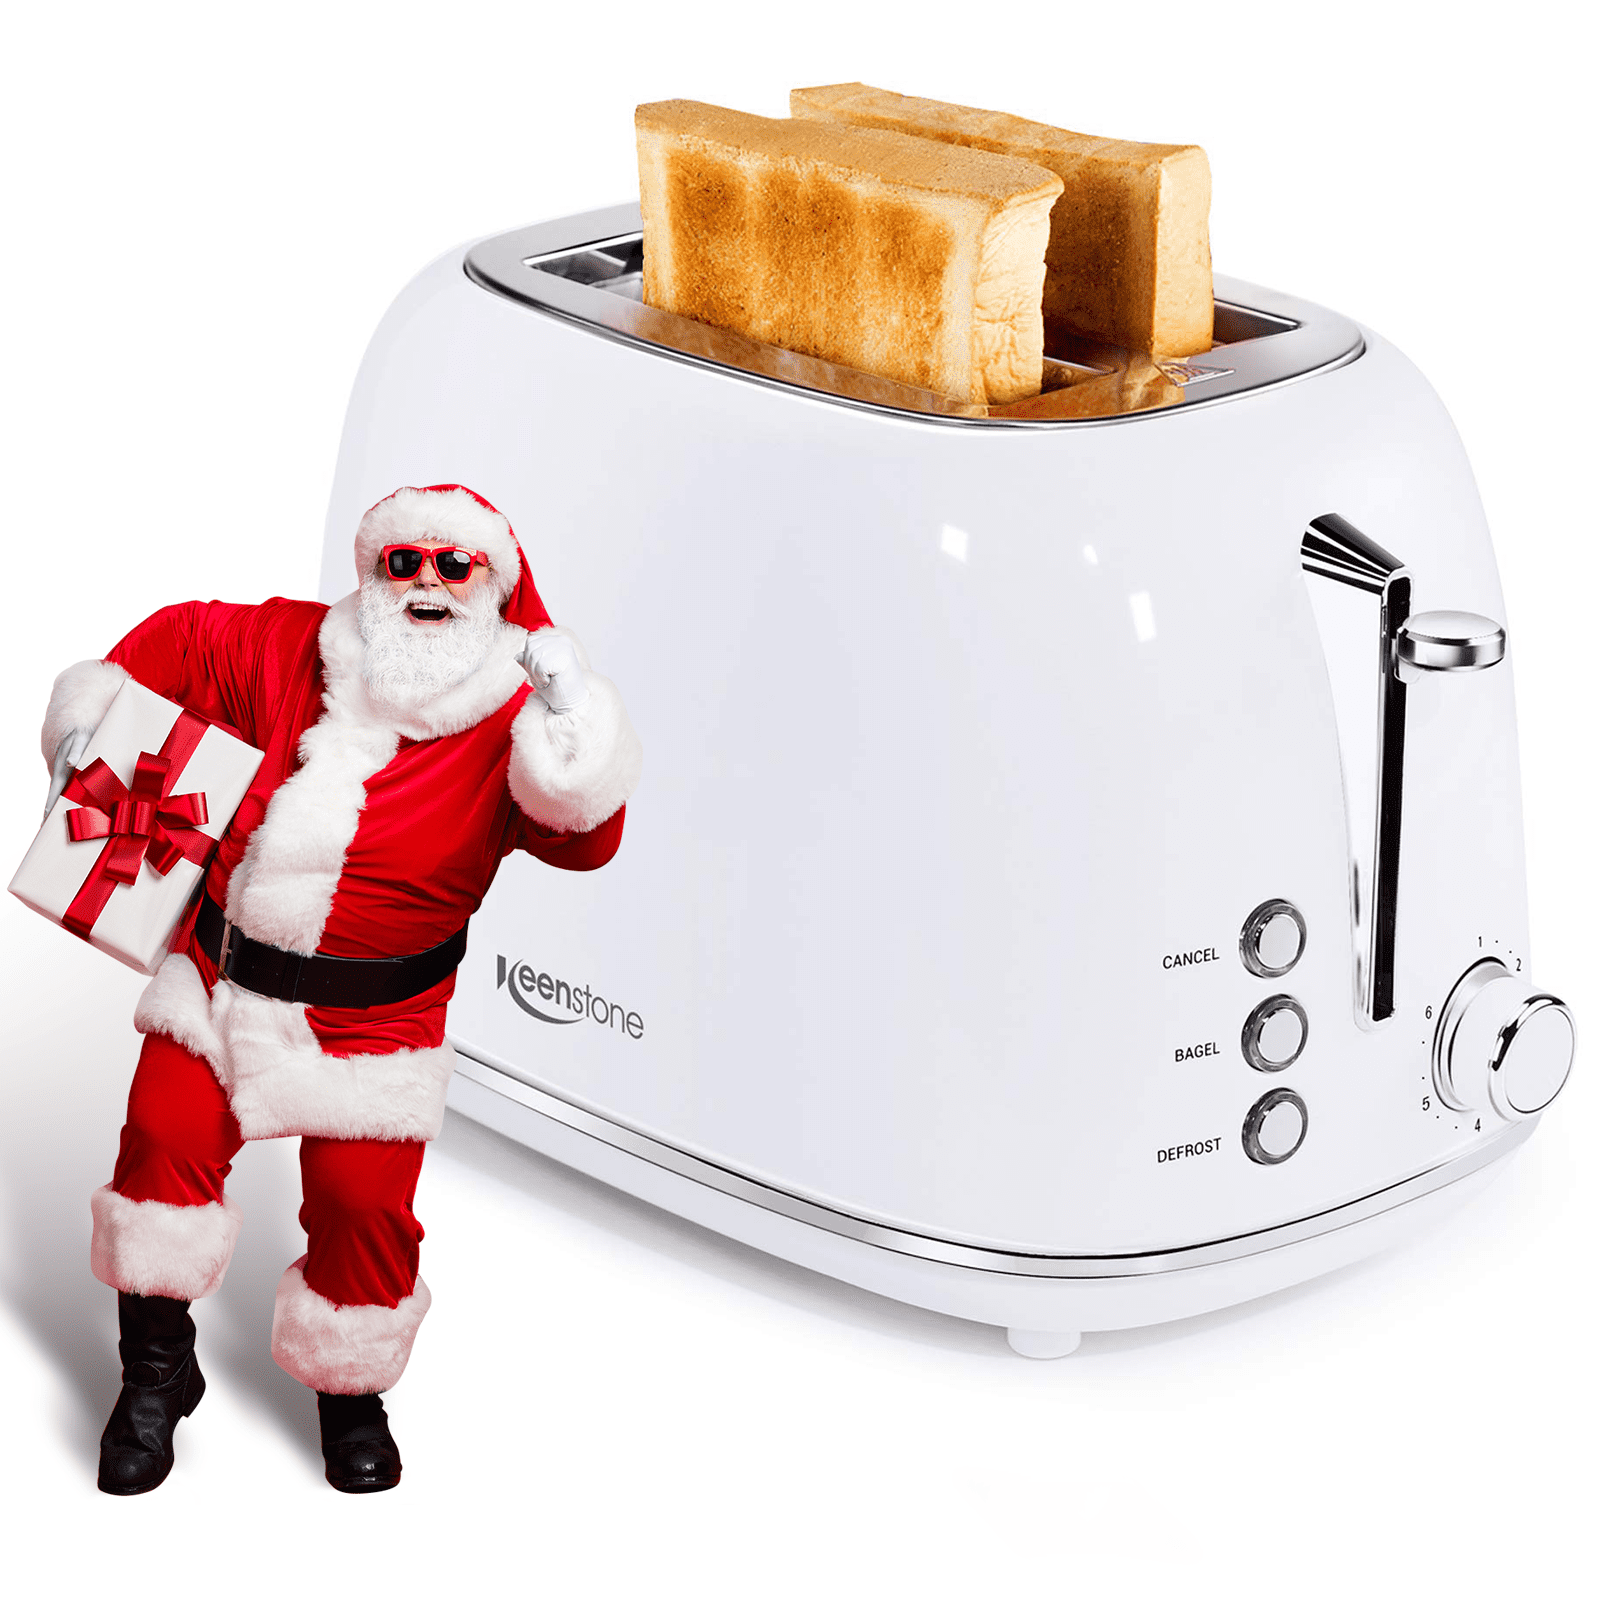 Keenstone Toaster, Retro 2 Slice Stainless Steel Toaster with Cancel,  Defrost Fuction for Bread, Bagel, Wide Slots Revolution Toasters, Kitchen